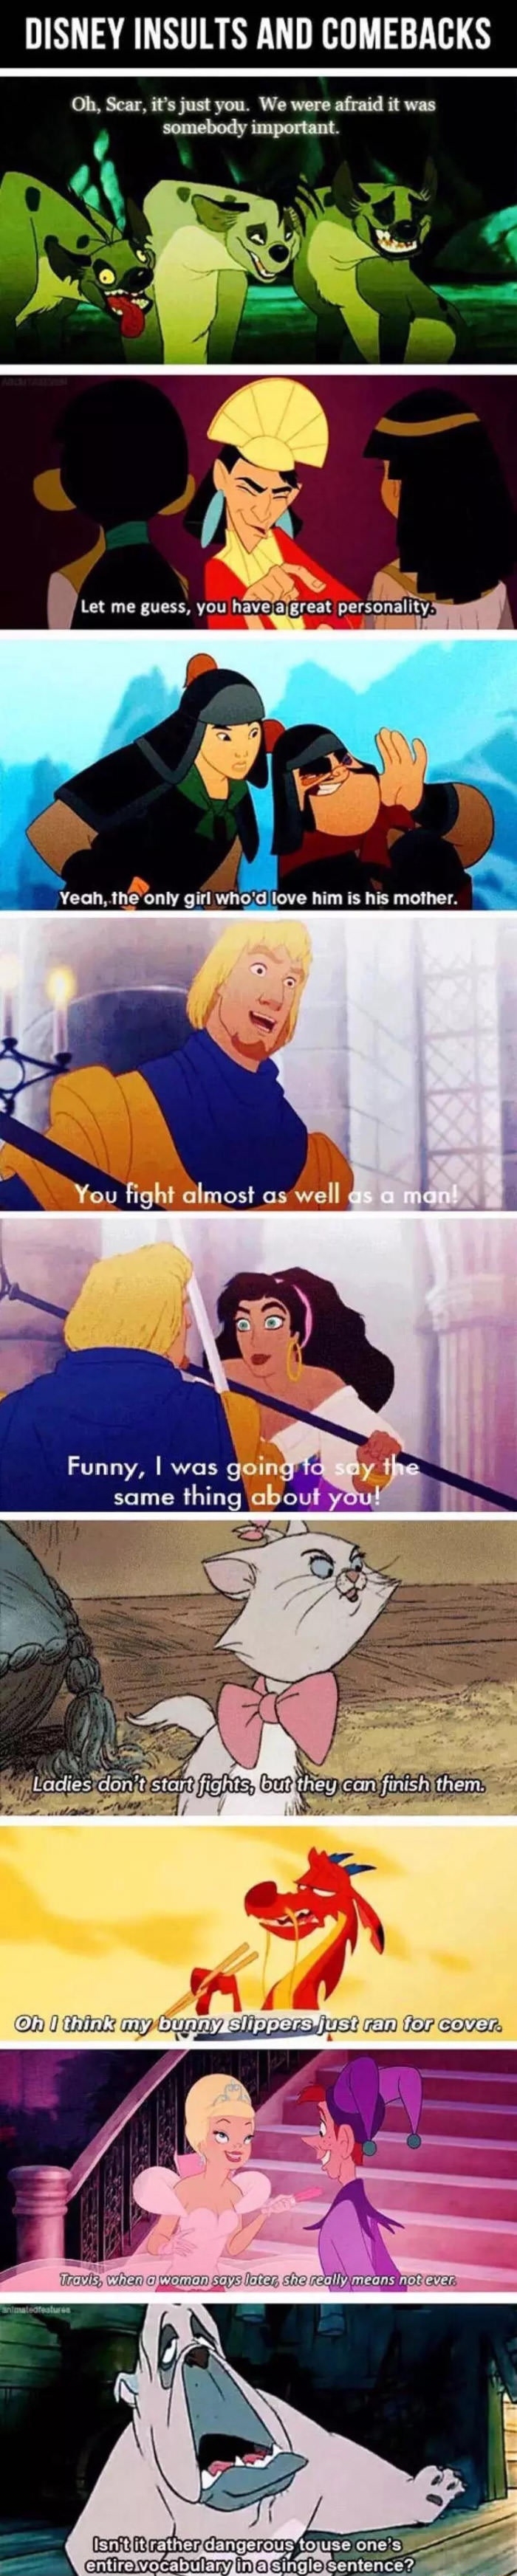 Disney insults and comeback